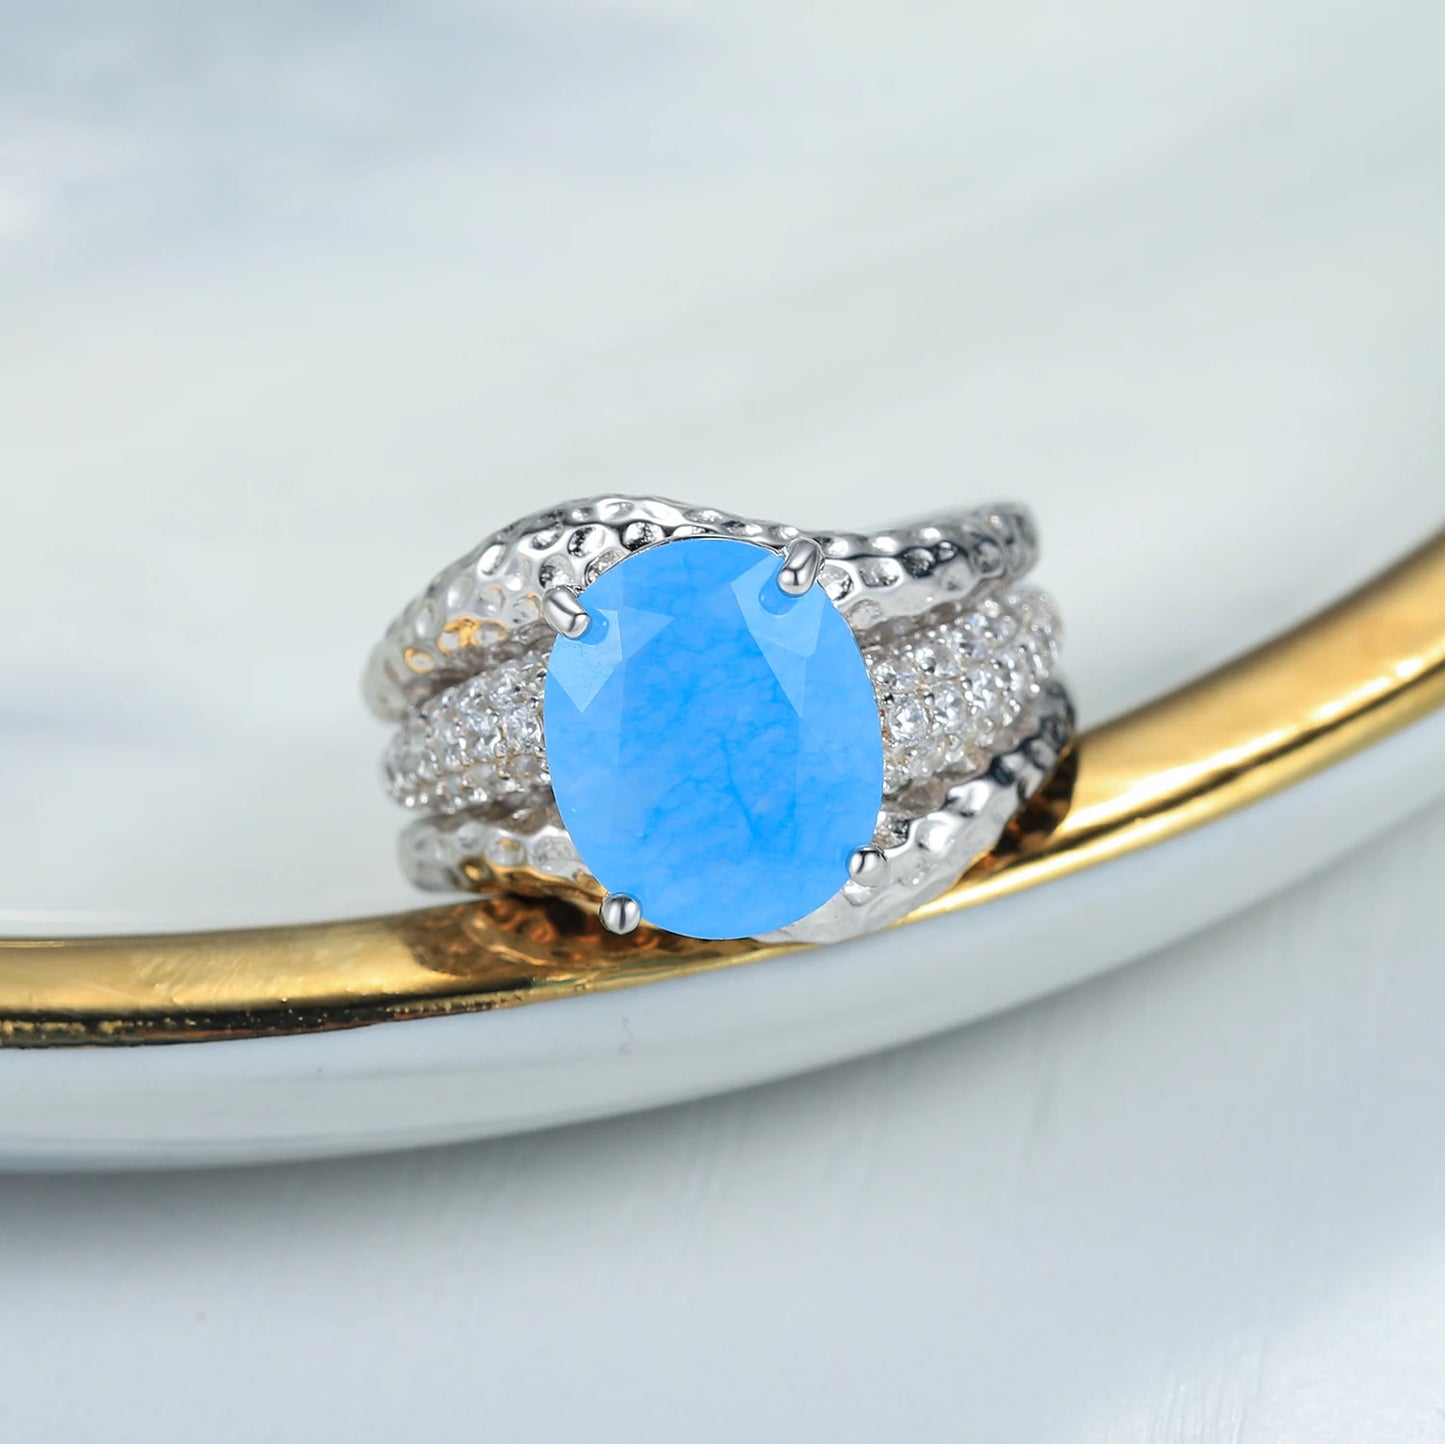 GEM'S BALLE Aqua-blue Calcedony Gemstone Cocktail Ring 925 Sterling Silver Handmade Jacket Rings For Women Fine Jewelry